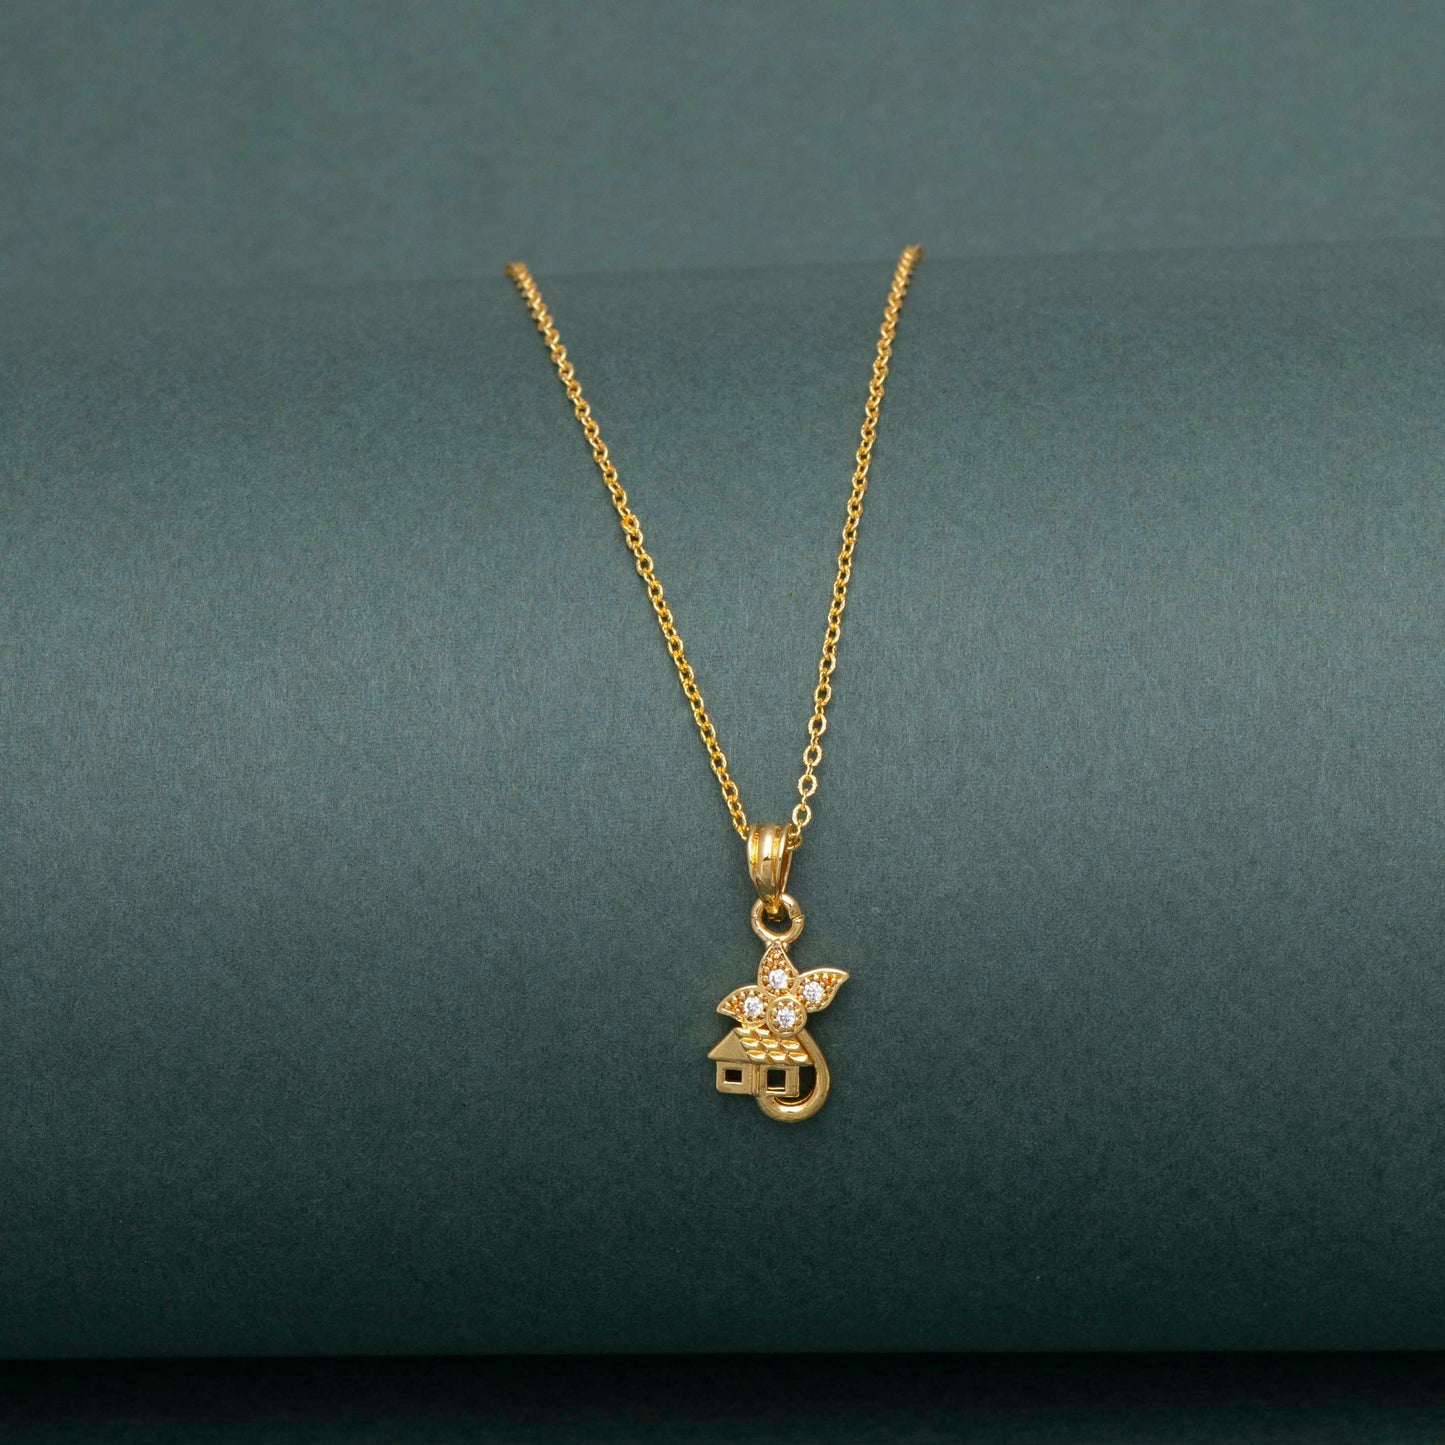 Fish Home and Camera shape Gold Chain Pendant For Girls and Women